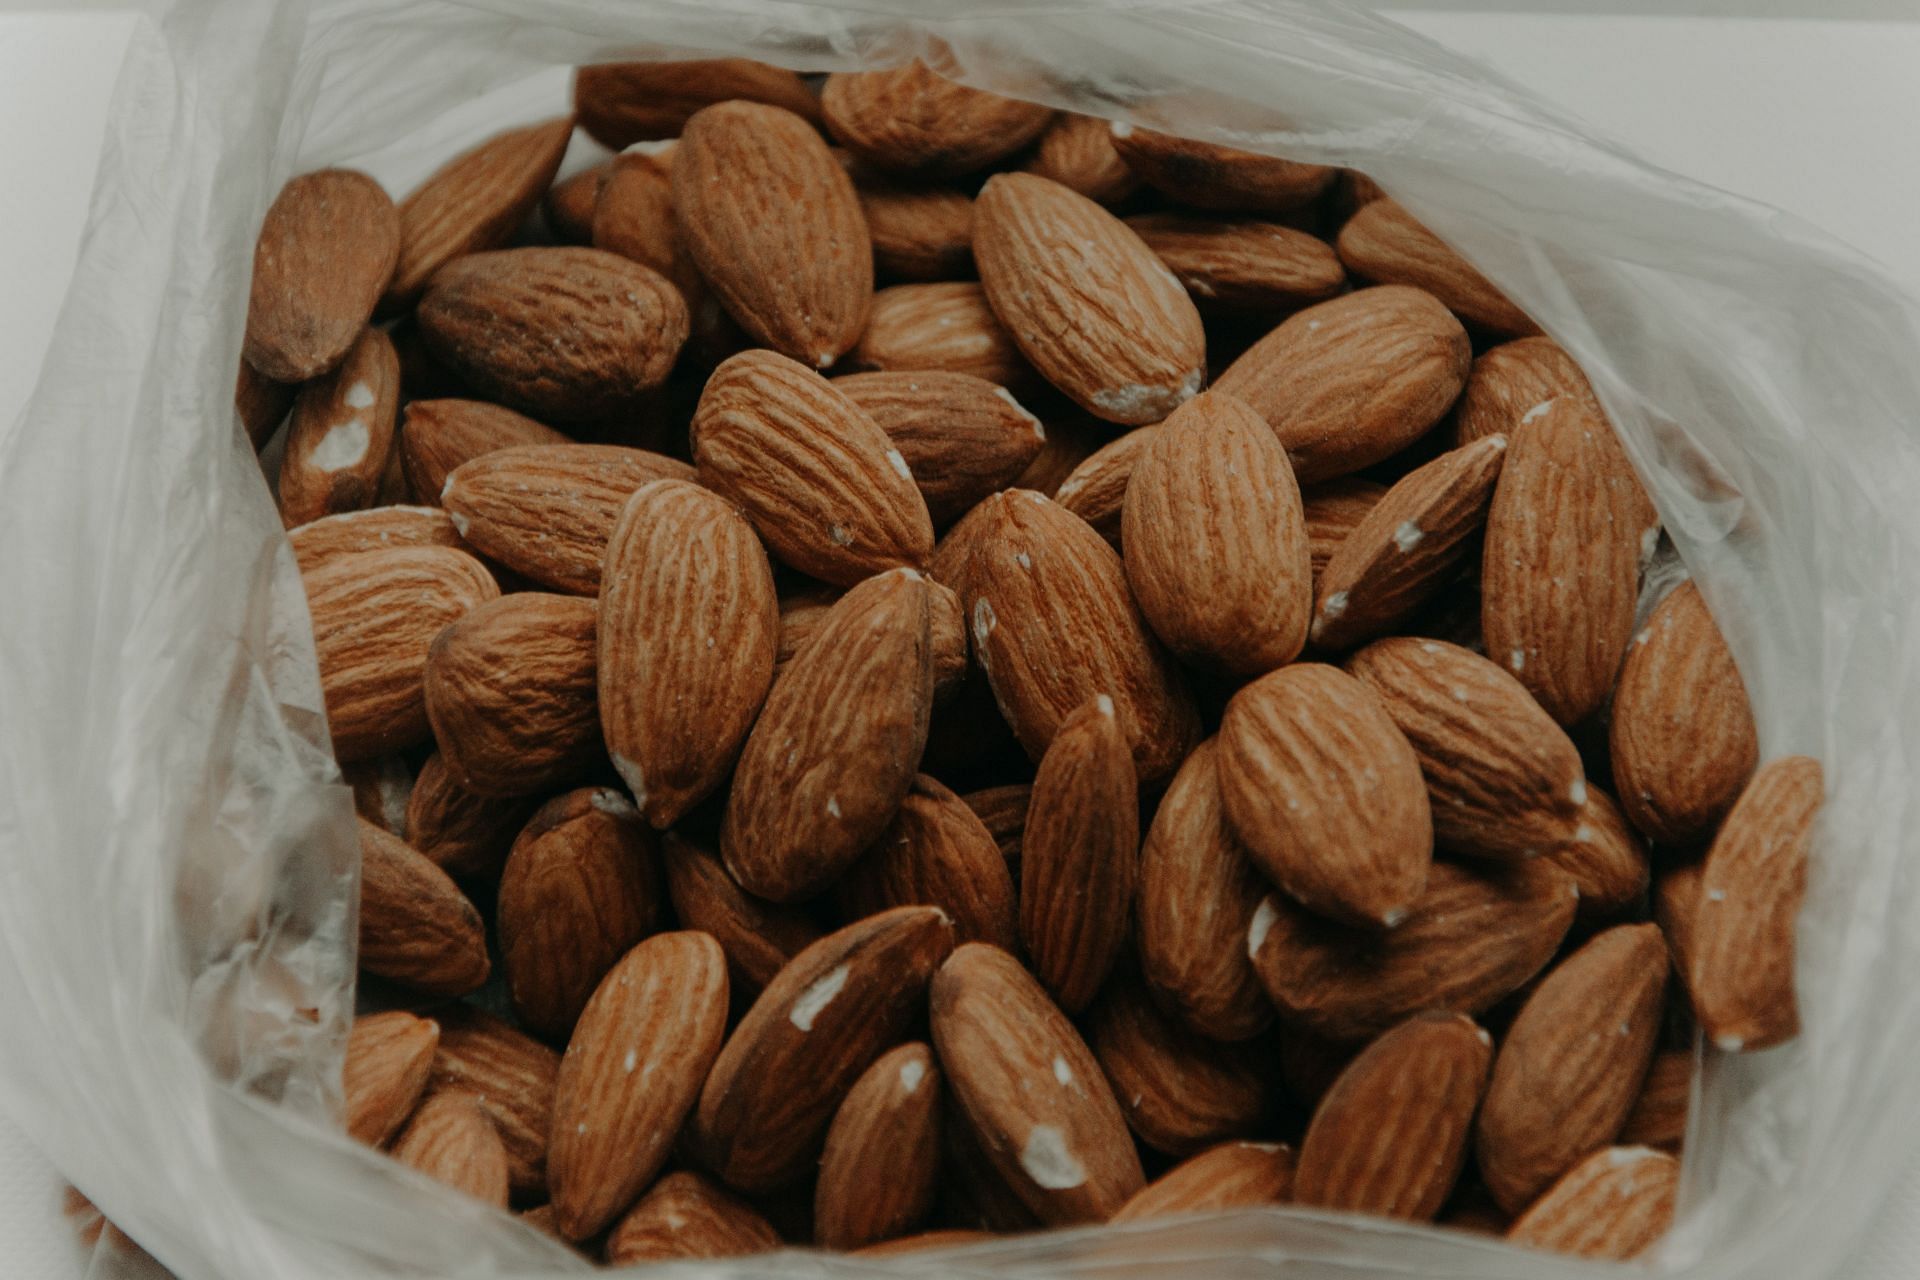 Foods for hair growth: Eating almonds will promote healthy hair growth. (Image via Pexels / Irina Iriser)